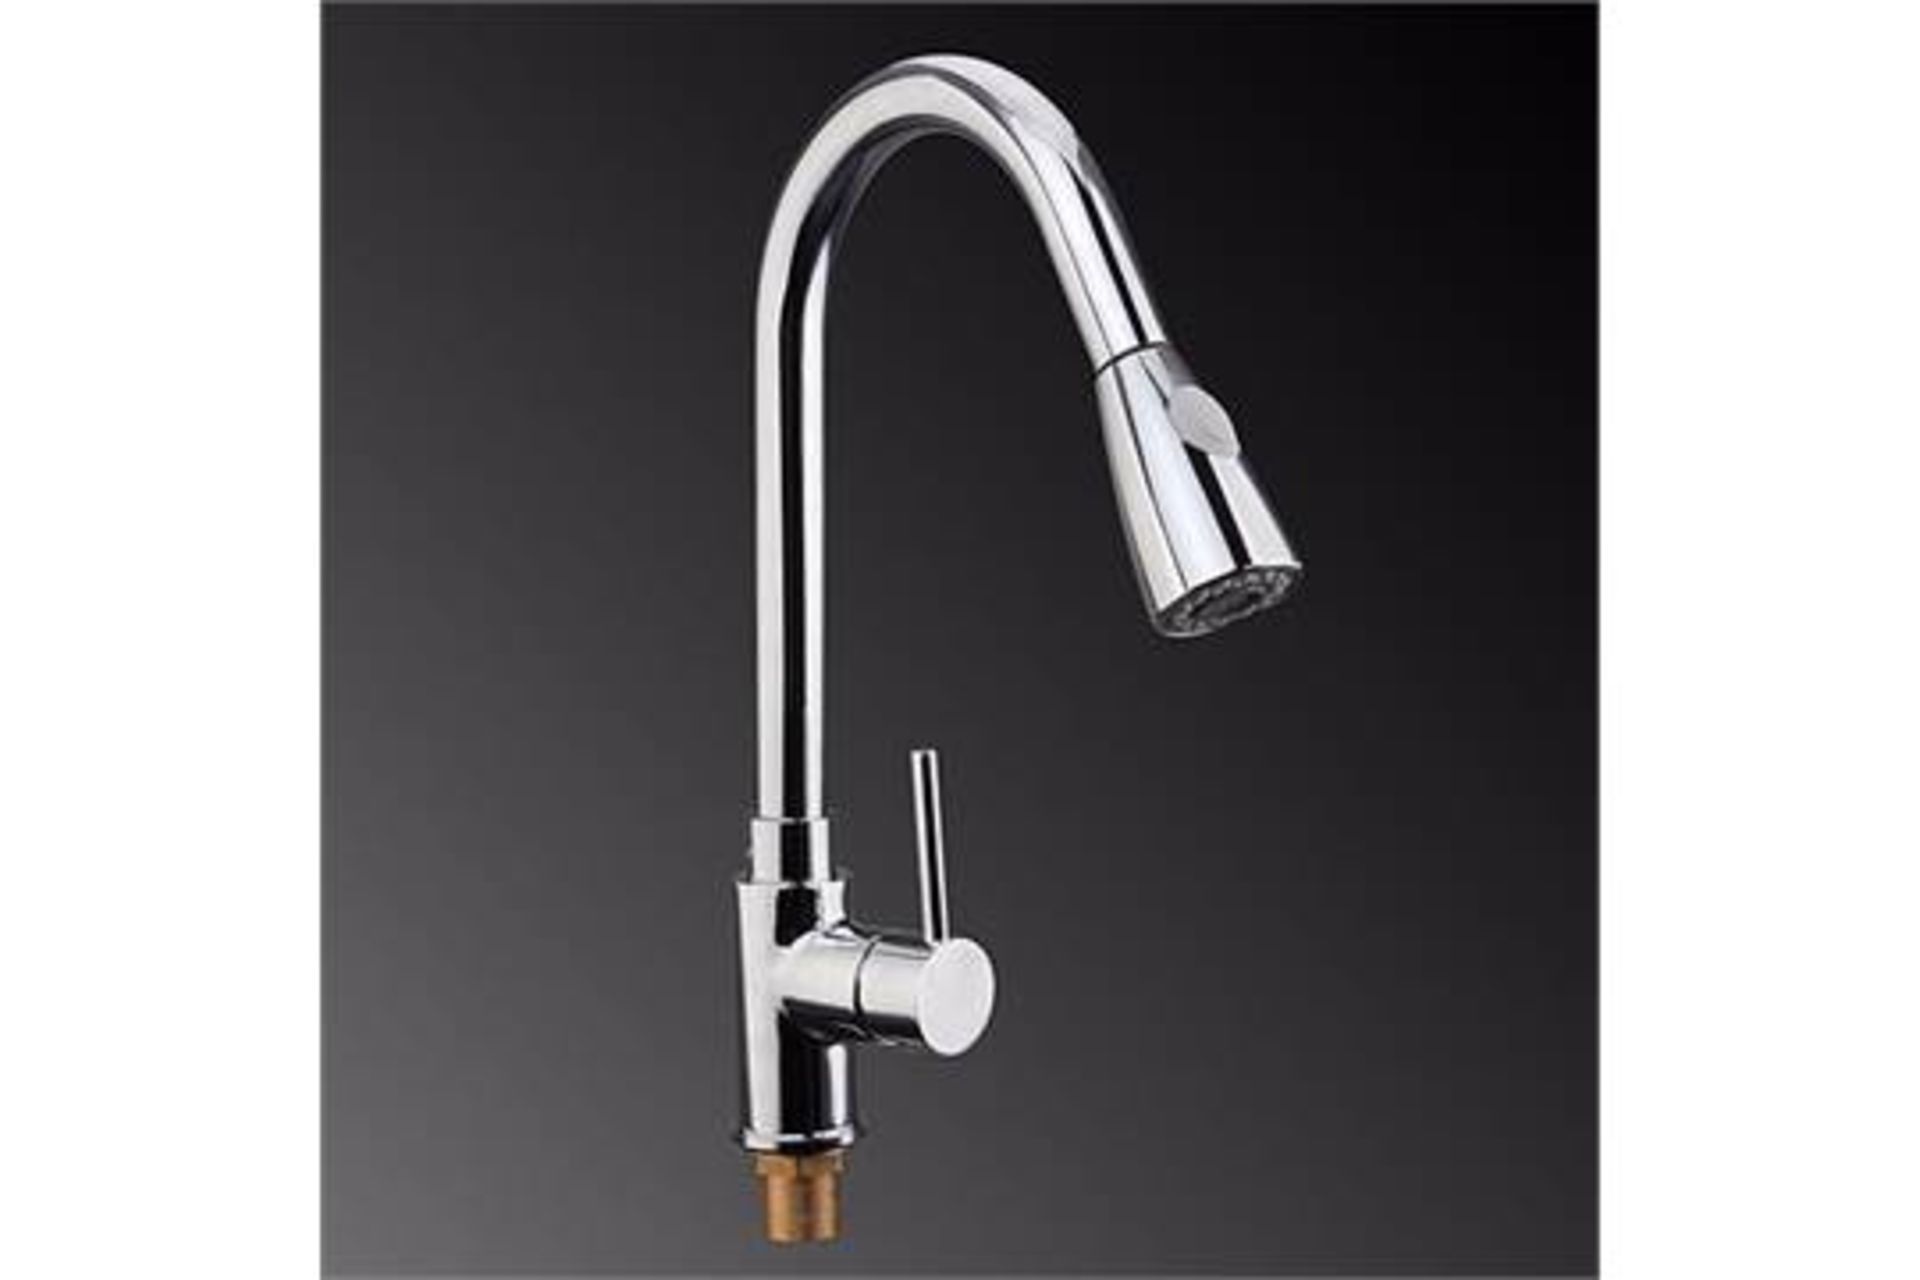 (O292) Della Chrome Plated Kitchen Mixer Tap - Pull Out Spray. RRP £253.98. Contemporary with an - Image 2 of 3